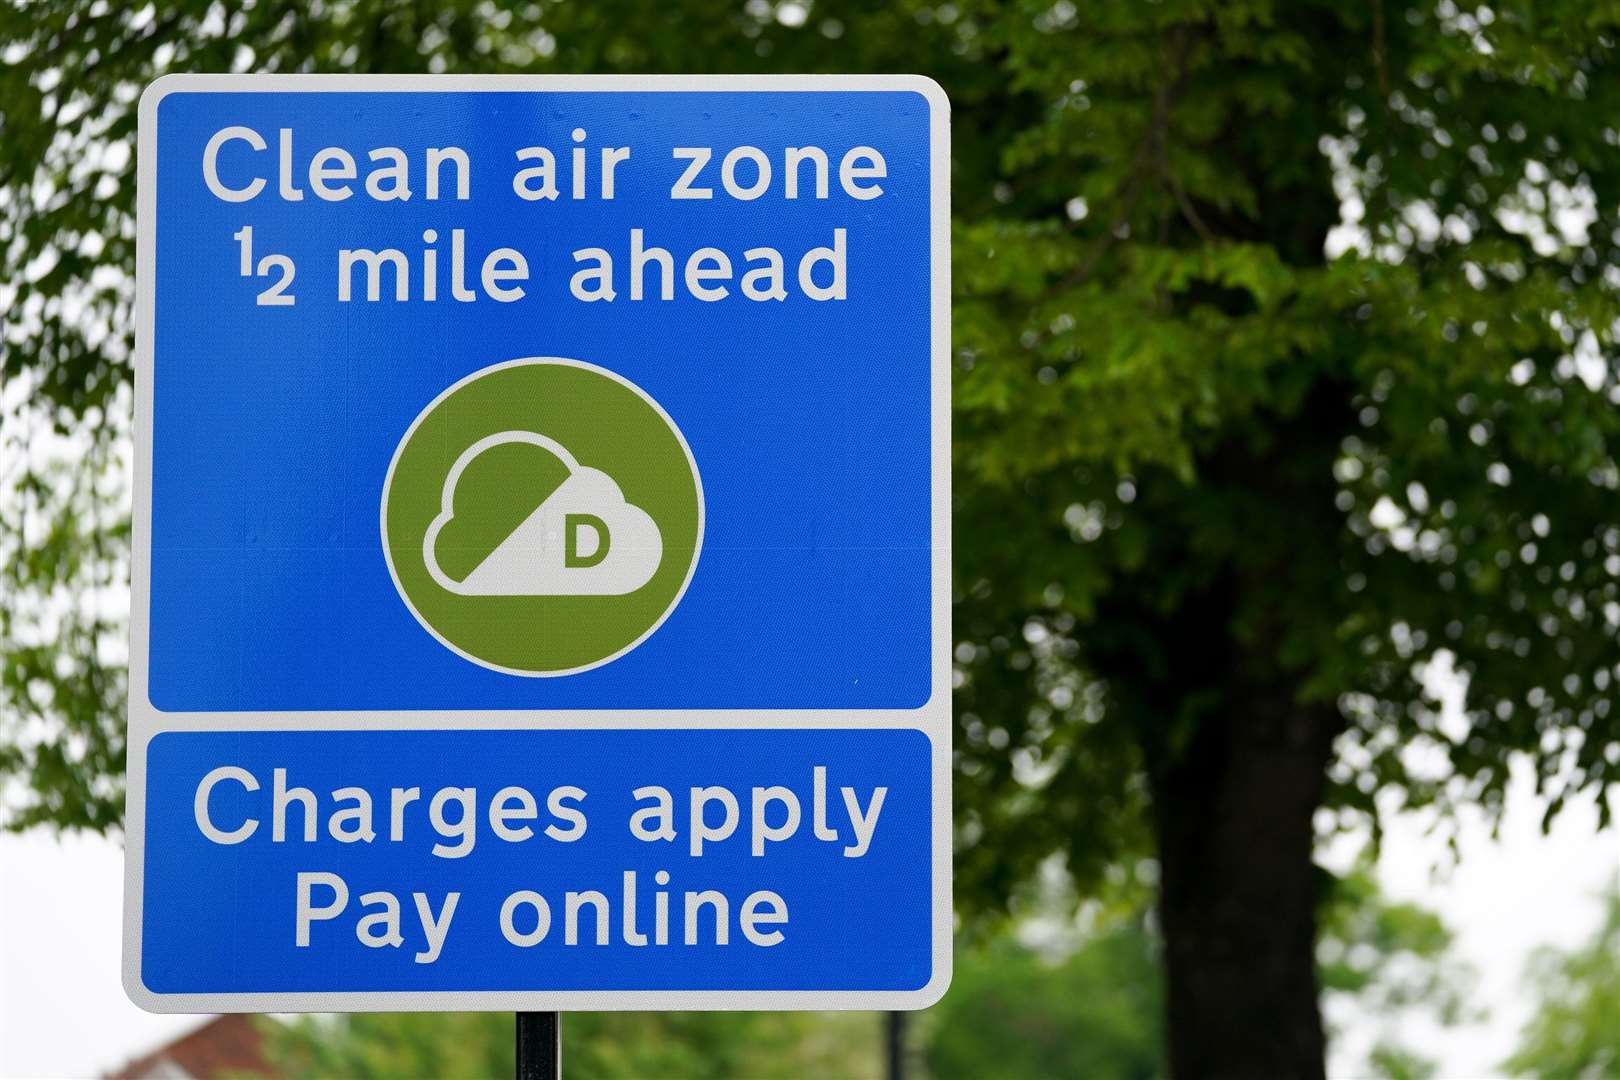 The National Audit Office said communications campaigns about bringing in clean air zones do not appear to be fully effective (Jacob King/PA)